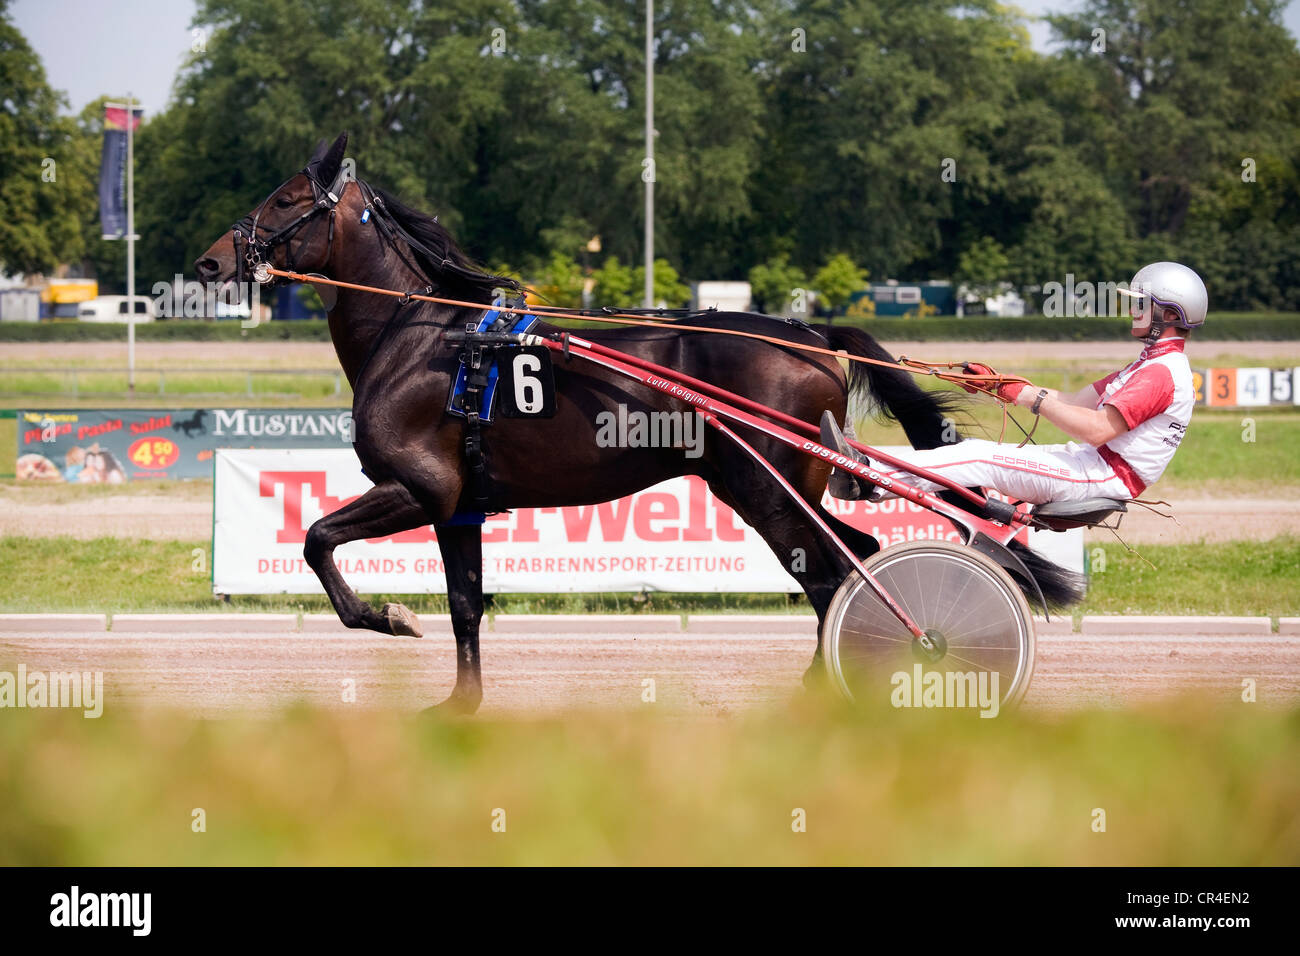 Horse and driver in the sulky, trotting race, Berlin, Germany, Europe Stock Photo